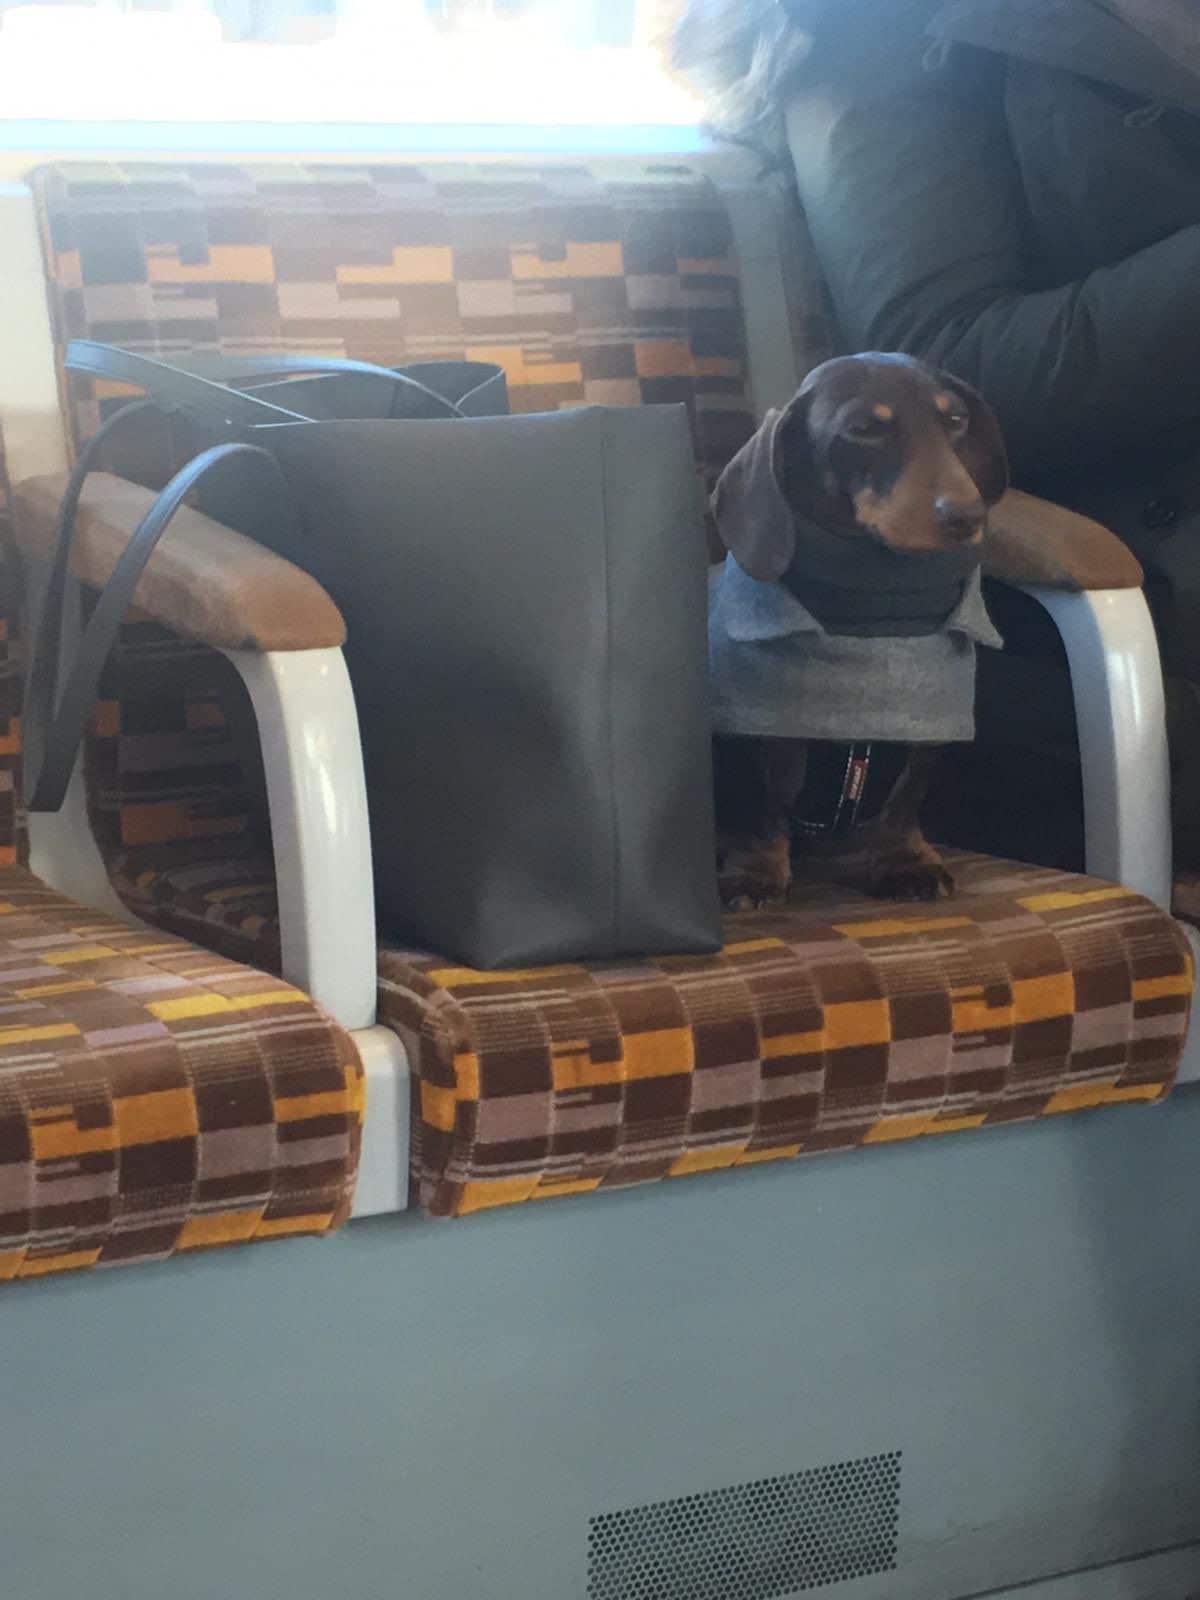 black and brown dachshund wearing a grey and black coat standing on a train seat between a handbag and a woman